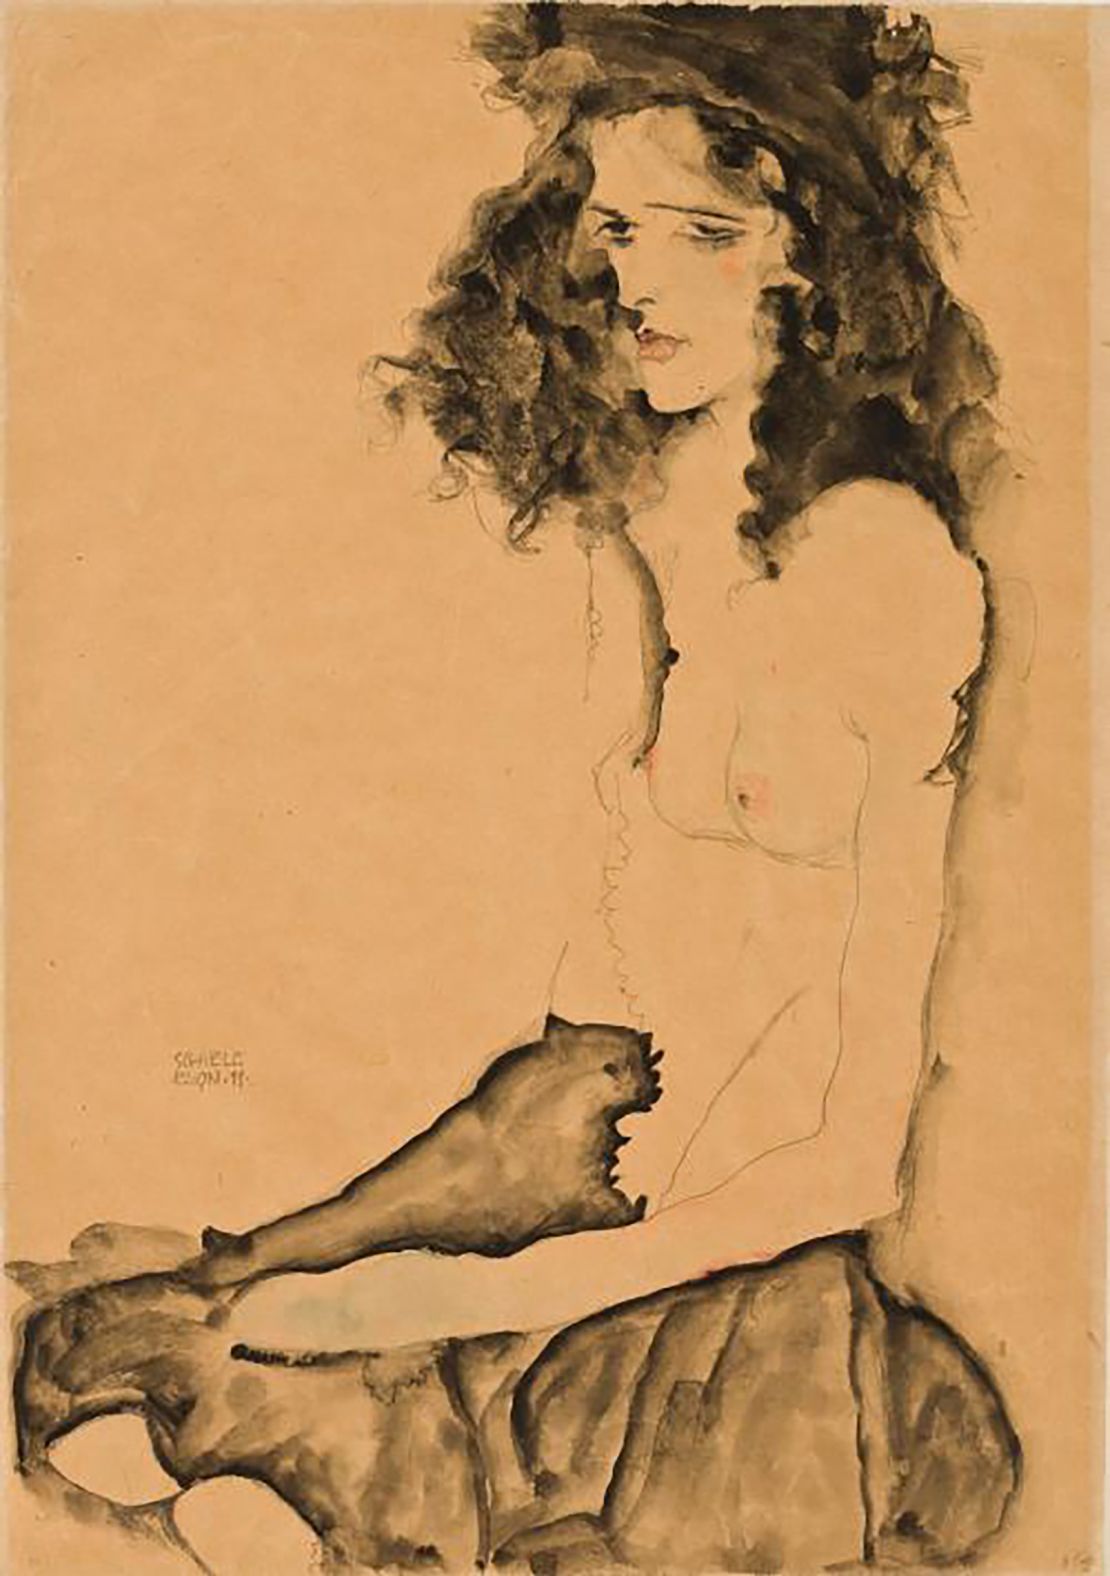 Egon Schiele's "Girl with Black Hair" is among the works that the heirs of Jewish collector Fritz Grünbaum say were stolen by the Nazis during World War II.